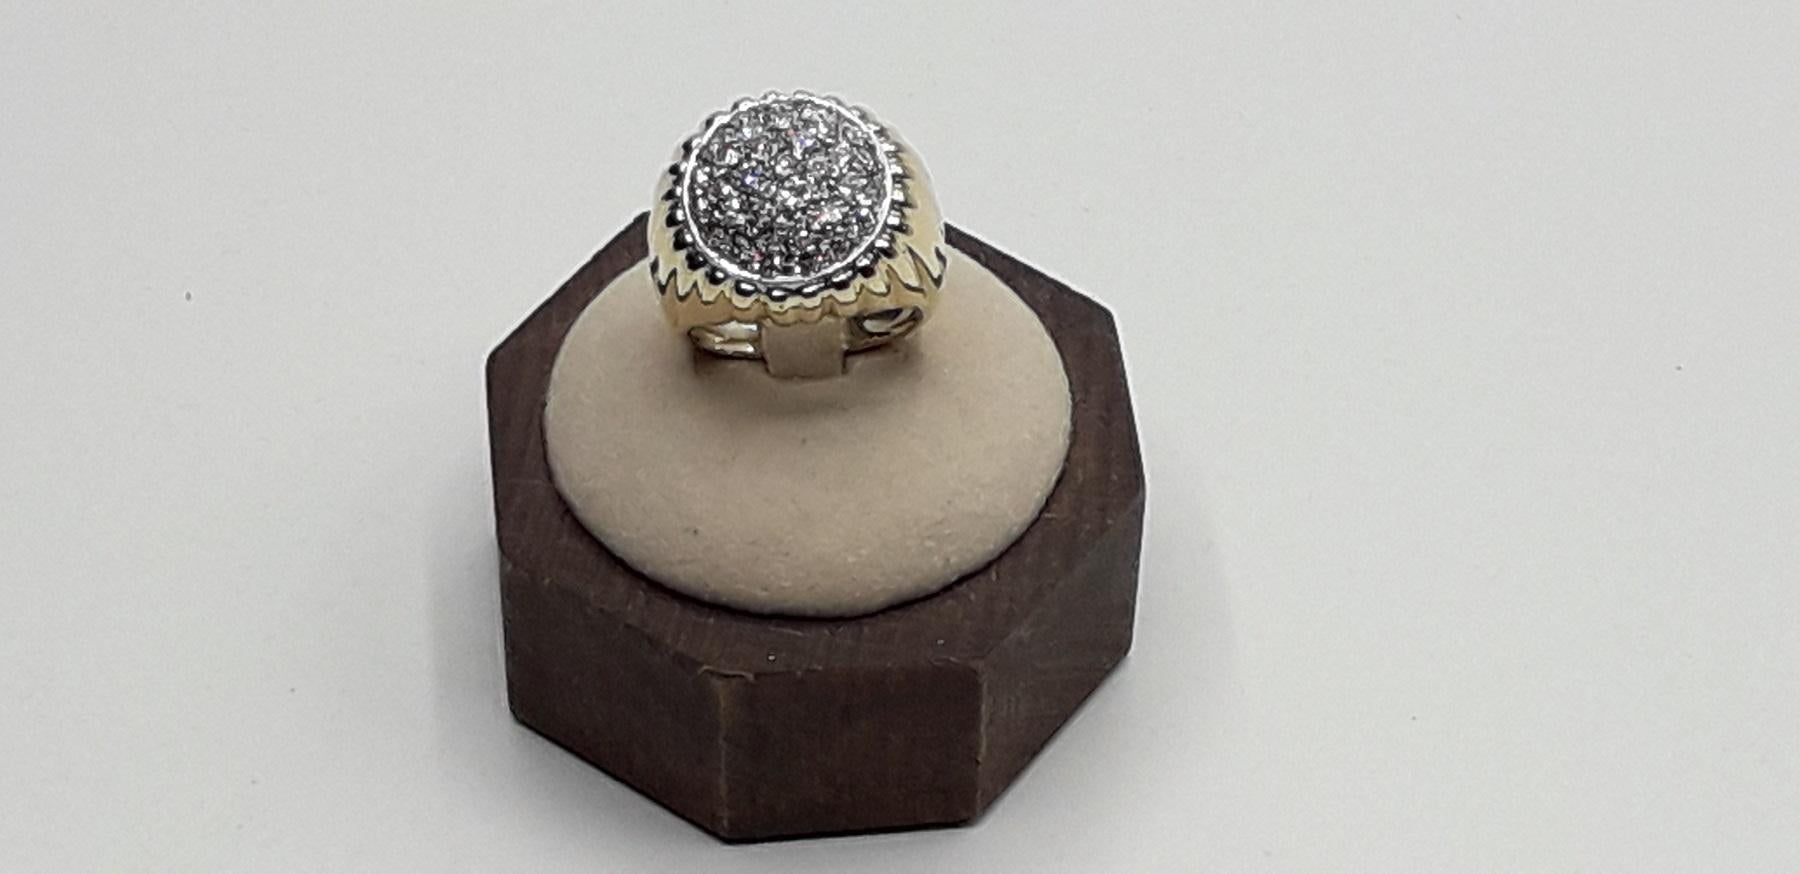 18Kt Gold ring with 2.60 brilliant cut diamonds in the hundred. Ring size Italian 17 please see the conversion in the table in the picture. This beautiful ring of Italian luxury jewelry is perfect for a refined and elegant woman. Total weight 12.60